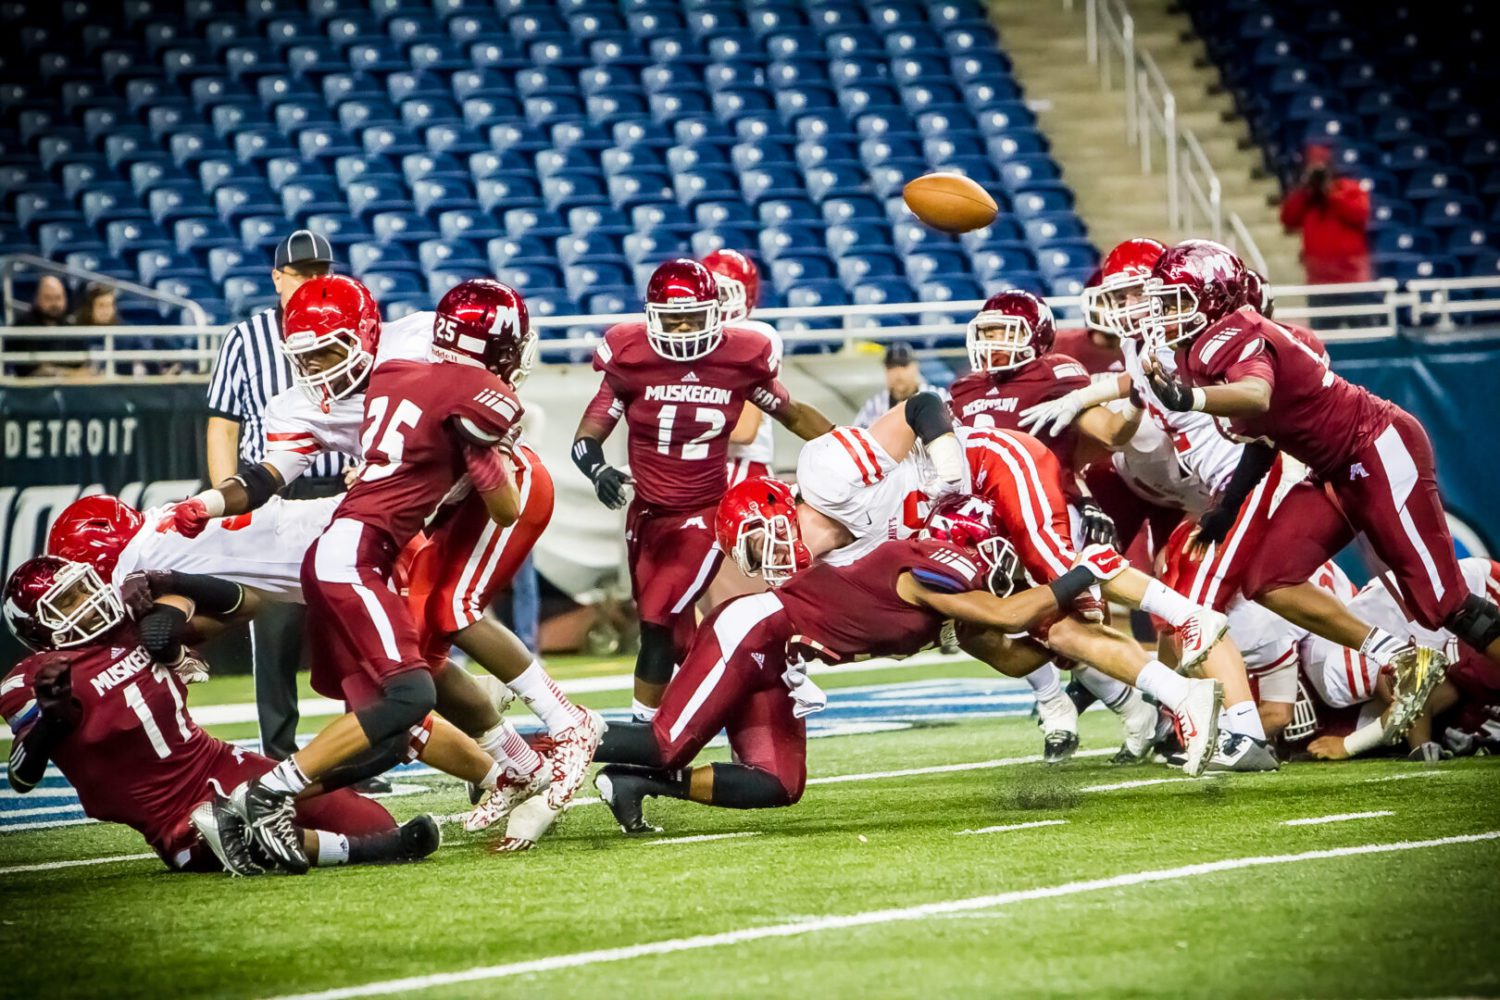 Photo gallery from Muskegon’s gridiron battle against Orchard Lake St. Mary’s in the Division 3 state finals